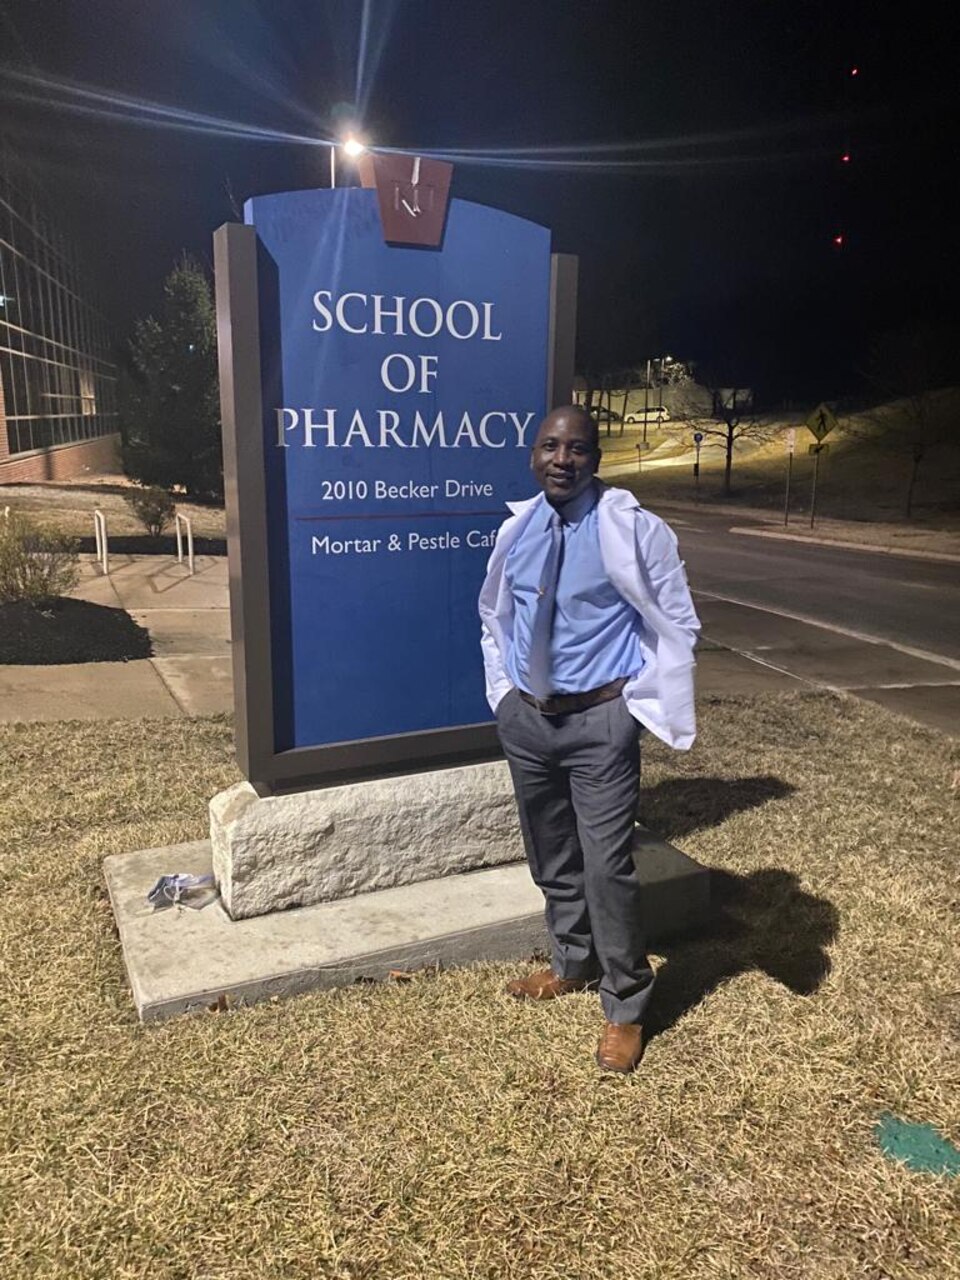 230130-N-NO901-1001 (Jan. 30, 2023) LAGOS, Nigeria - Hospital Corpsman 1st Class Agossou Marcellin, a Benin native, Pharmaceutical doctorate student, and U.S. Navy Reservist, poses for a photo in front of the University of Kansas’ School of Pharmacy. Marcellin is currently deployed to Benin in support of exercise Obangame Express 2023. Obangame Express 2023, conducted by U.S. Naval Forces Africa, is a maritime exercise designed to improve cooperation, and increase maritime safety and security among participating nations in the Gulf of Guinea and Southern Atlantic Ocean. U.S. Sixth Fleet, headquartered in Naples, Italy, conducts the full spectrum of joint and naval operations, often in concert with allied and interagency partners, in order to advance U.S. national interests and security and stability in Europe and Africa. (Courtesy Photo)